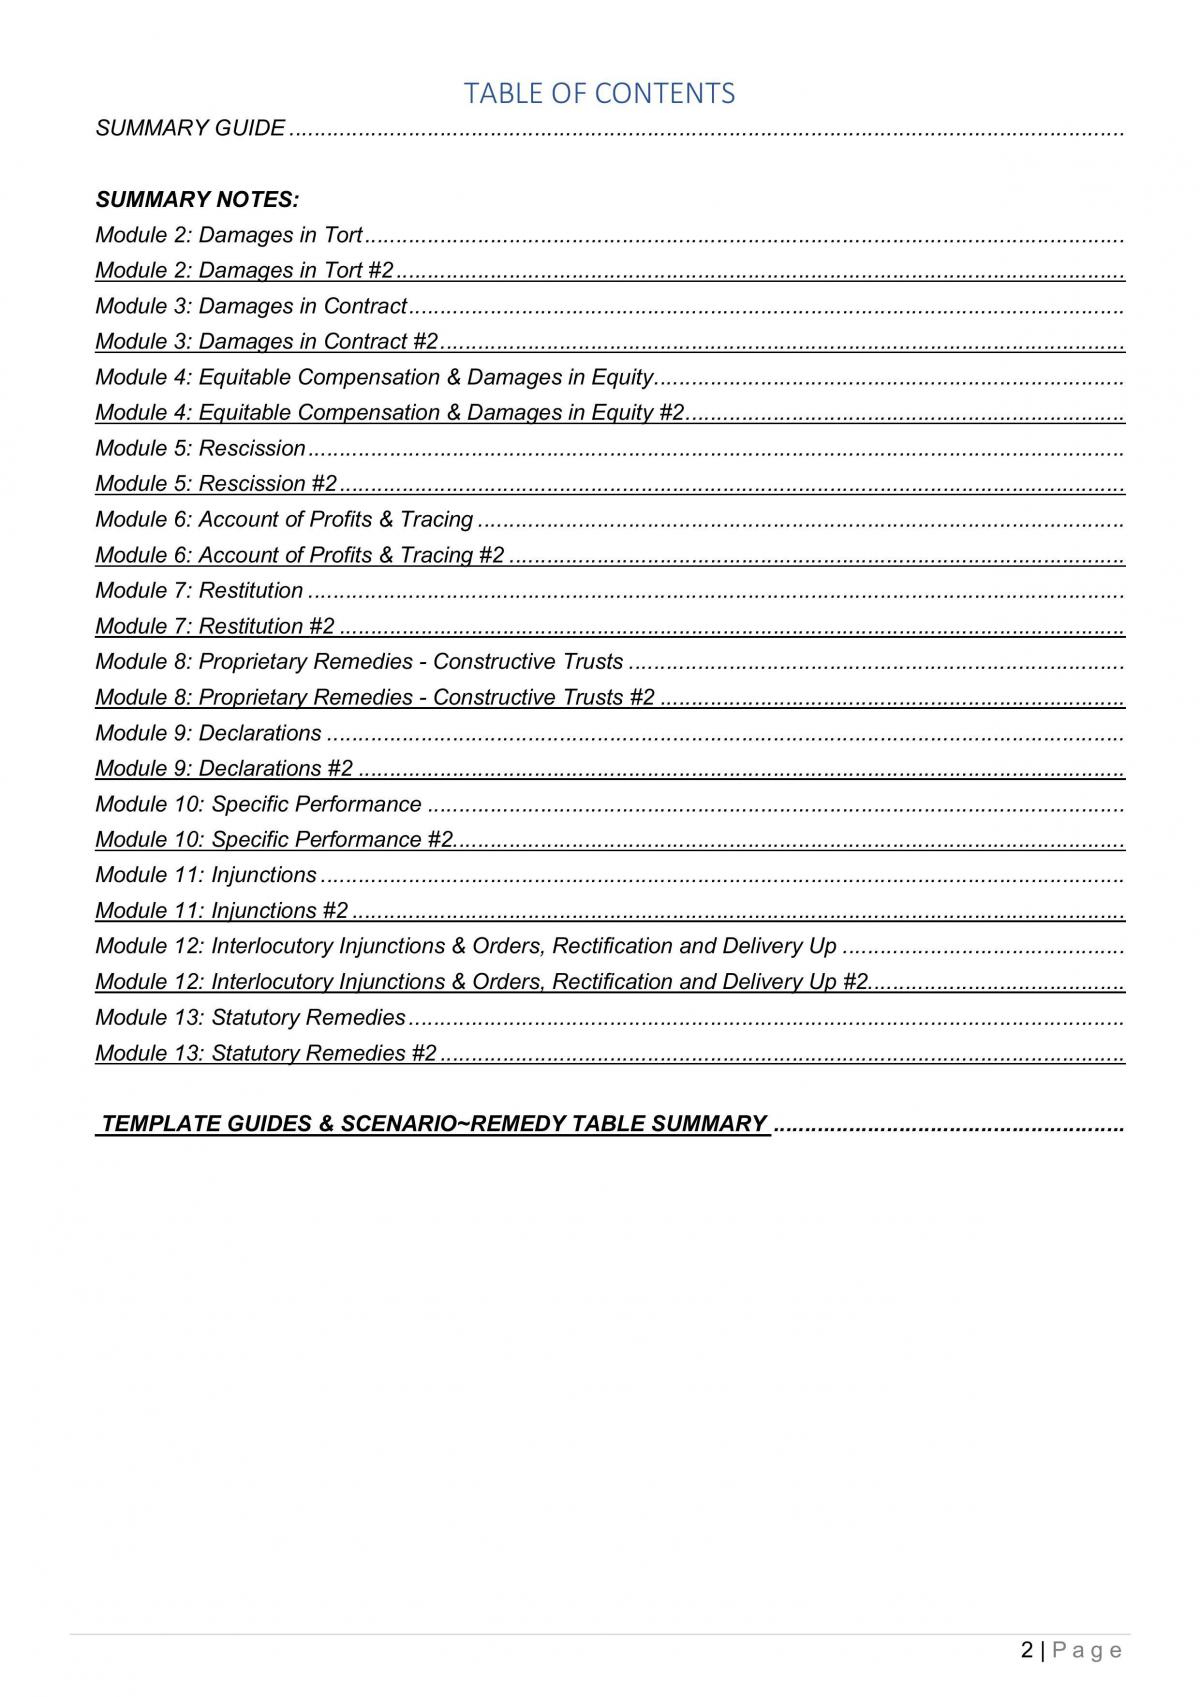 Remedies 200756 - Final Exam Notes - Detailed Summary table and Full Set of notes for ALL modules - Final Exam Templates for Exam - Page 2